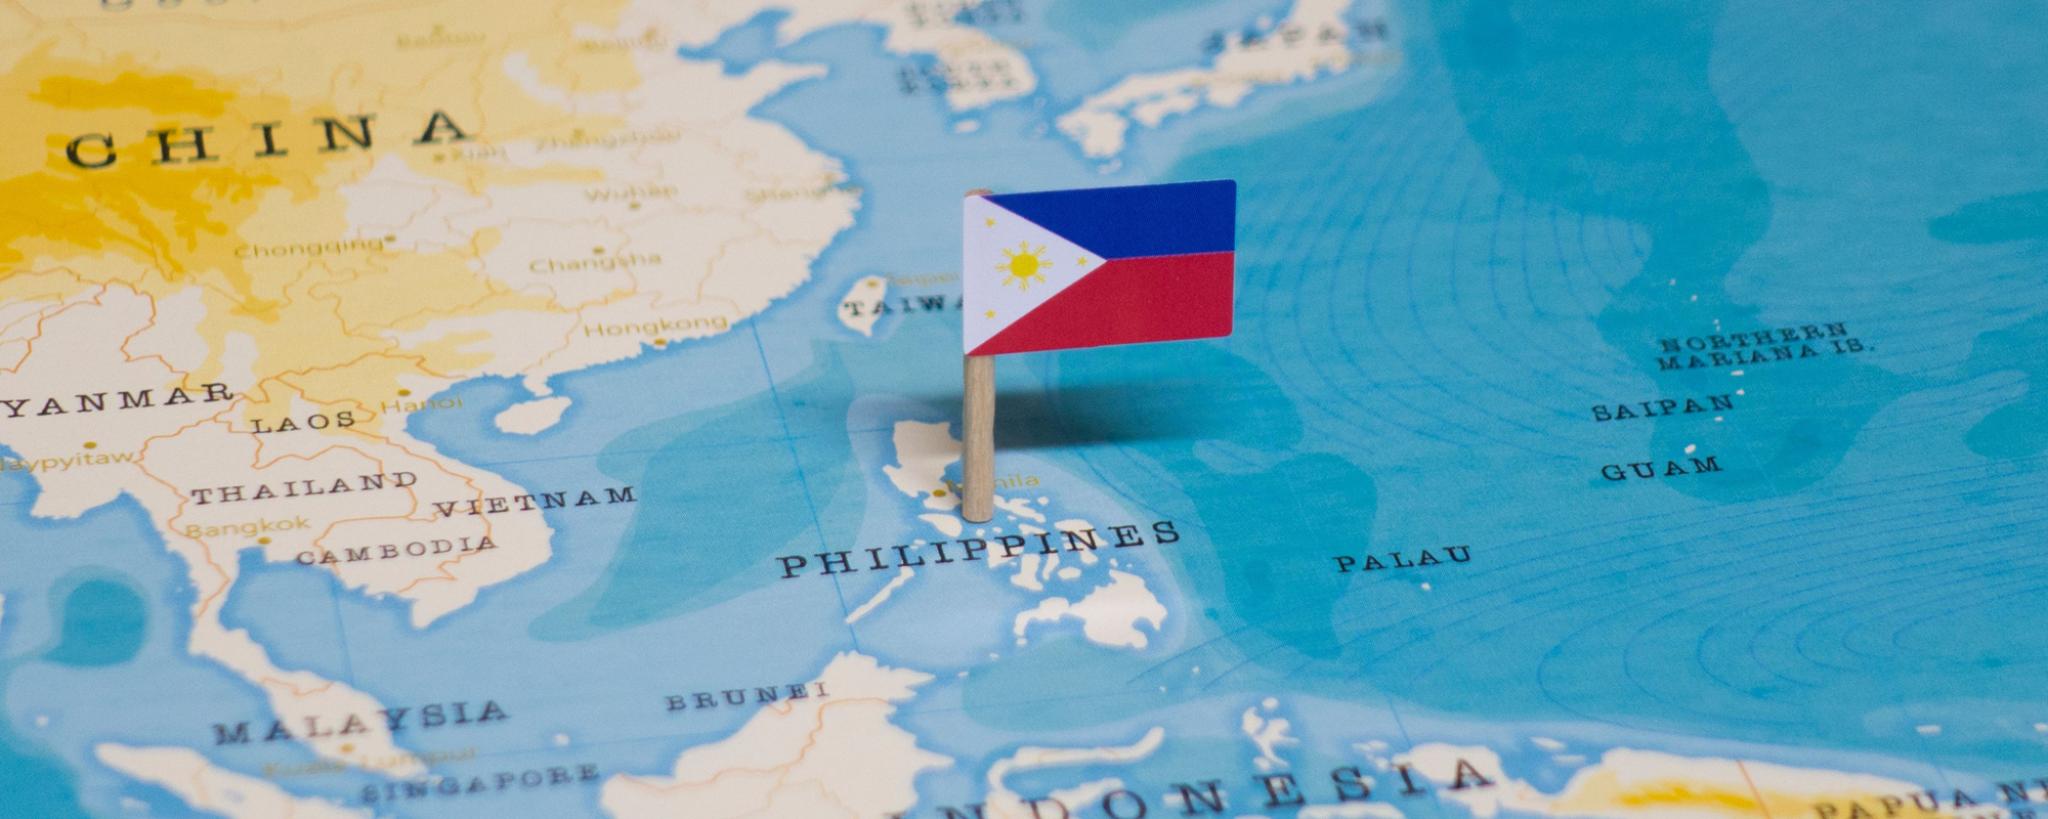 Philippines flag pinned on a map of the Philippines and Pacific 